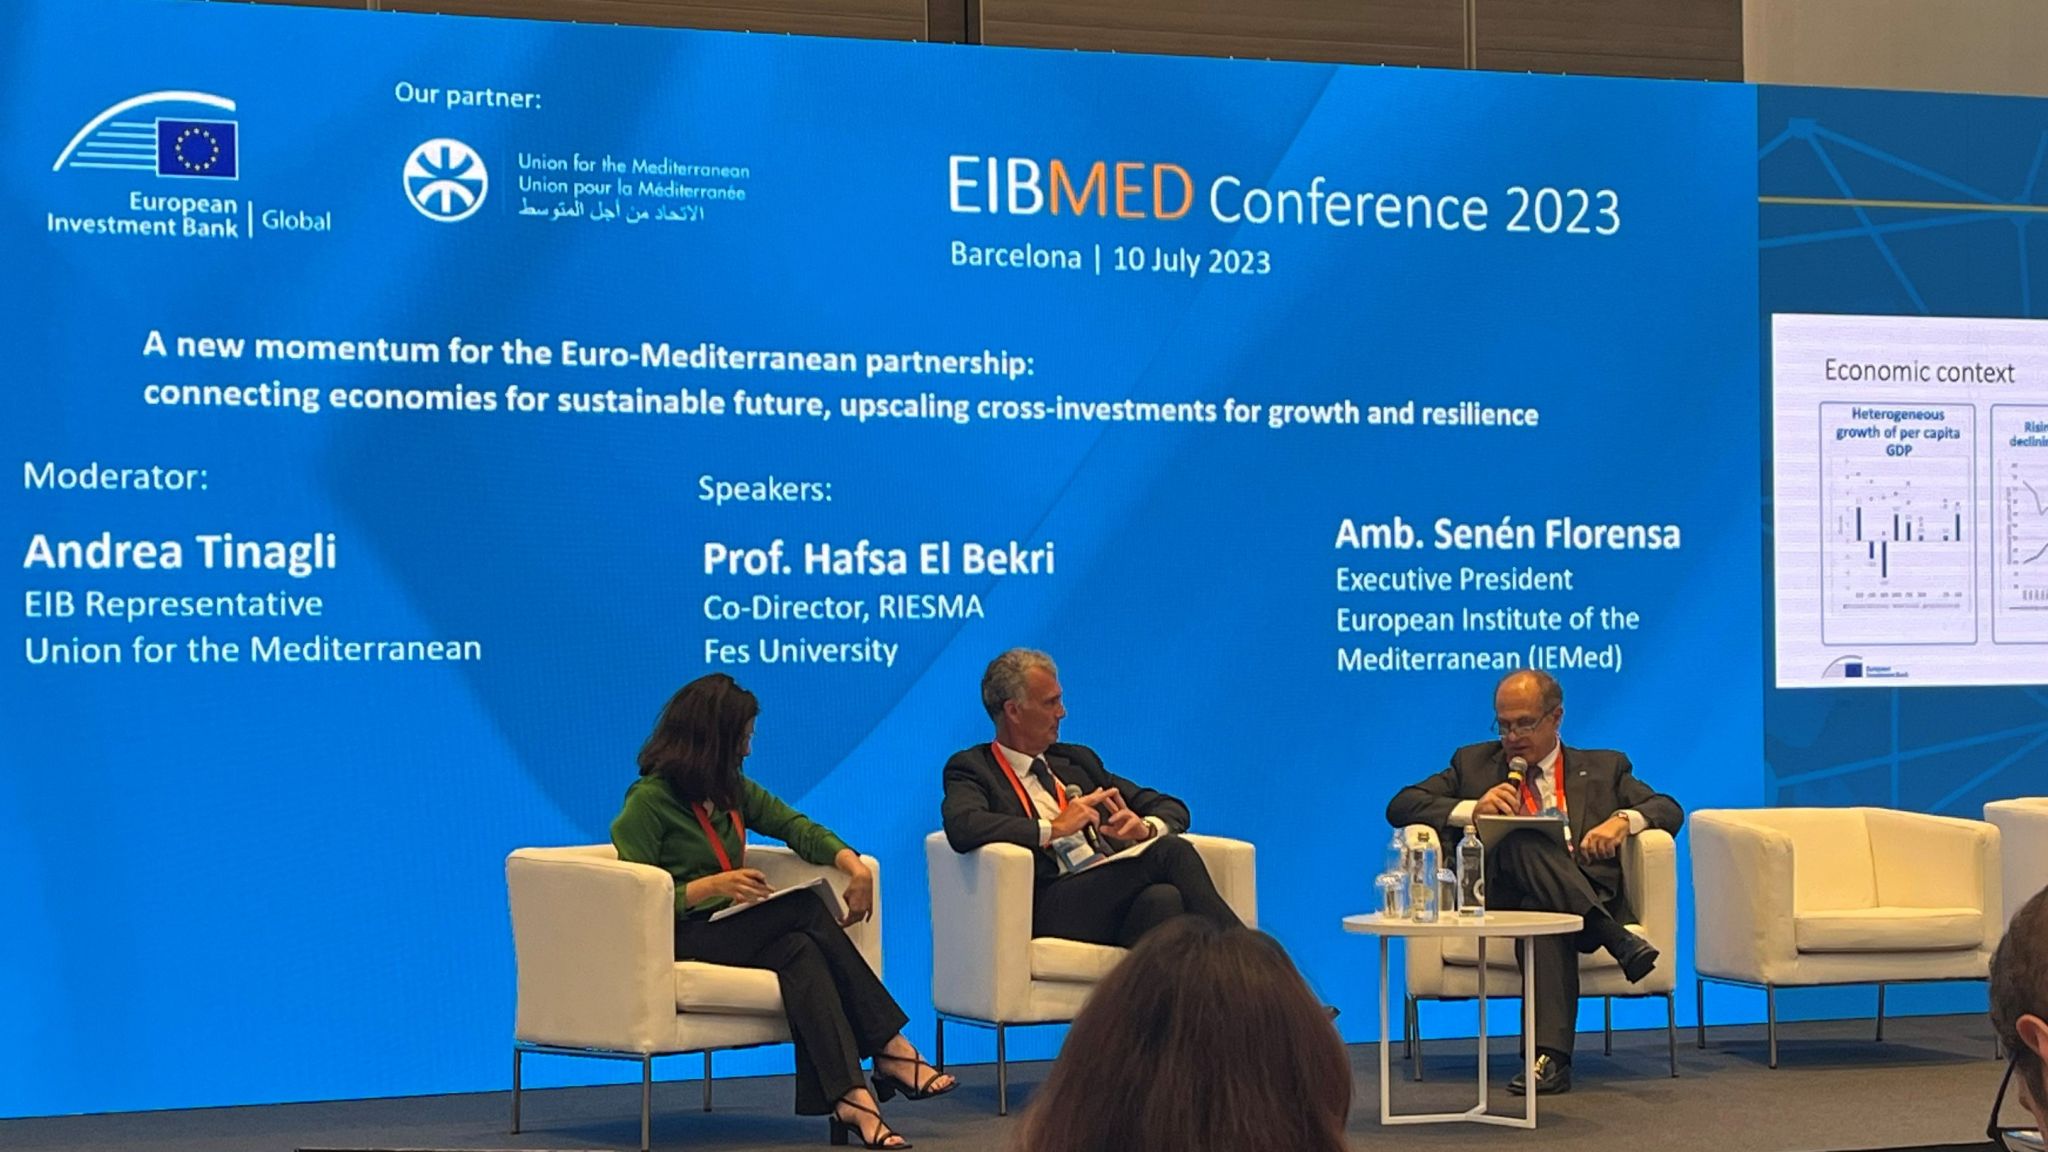 Euromed University presents in Barcelona during the EIBMED 2023 edition conference